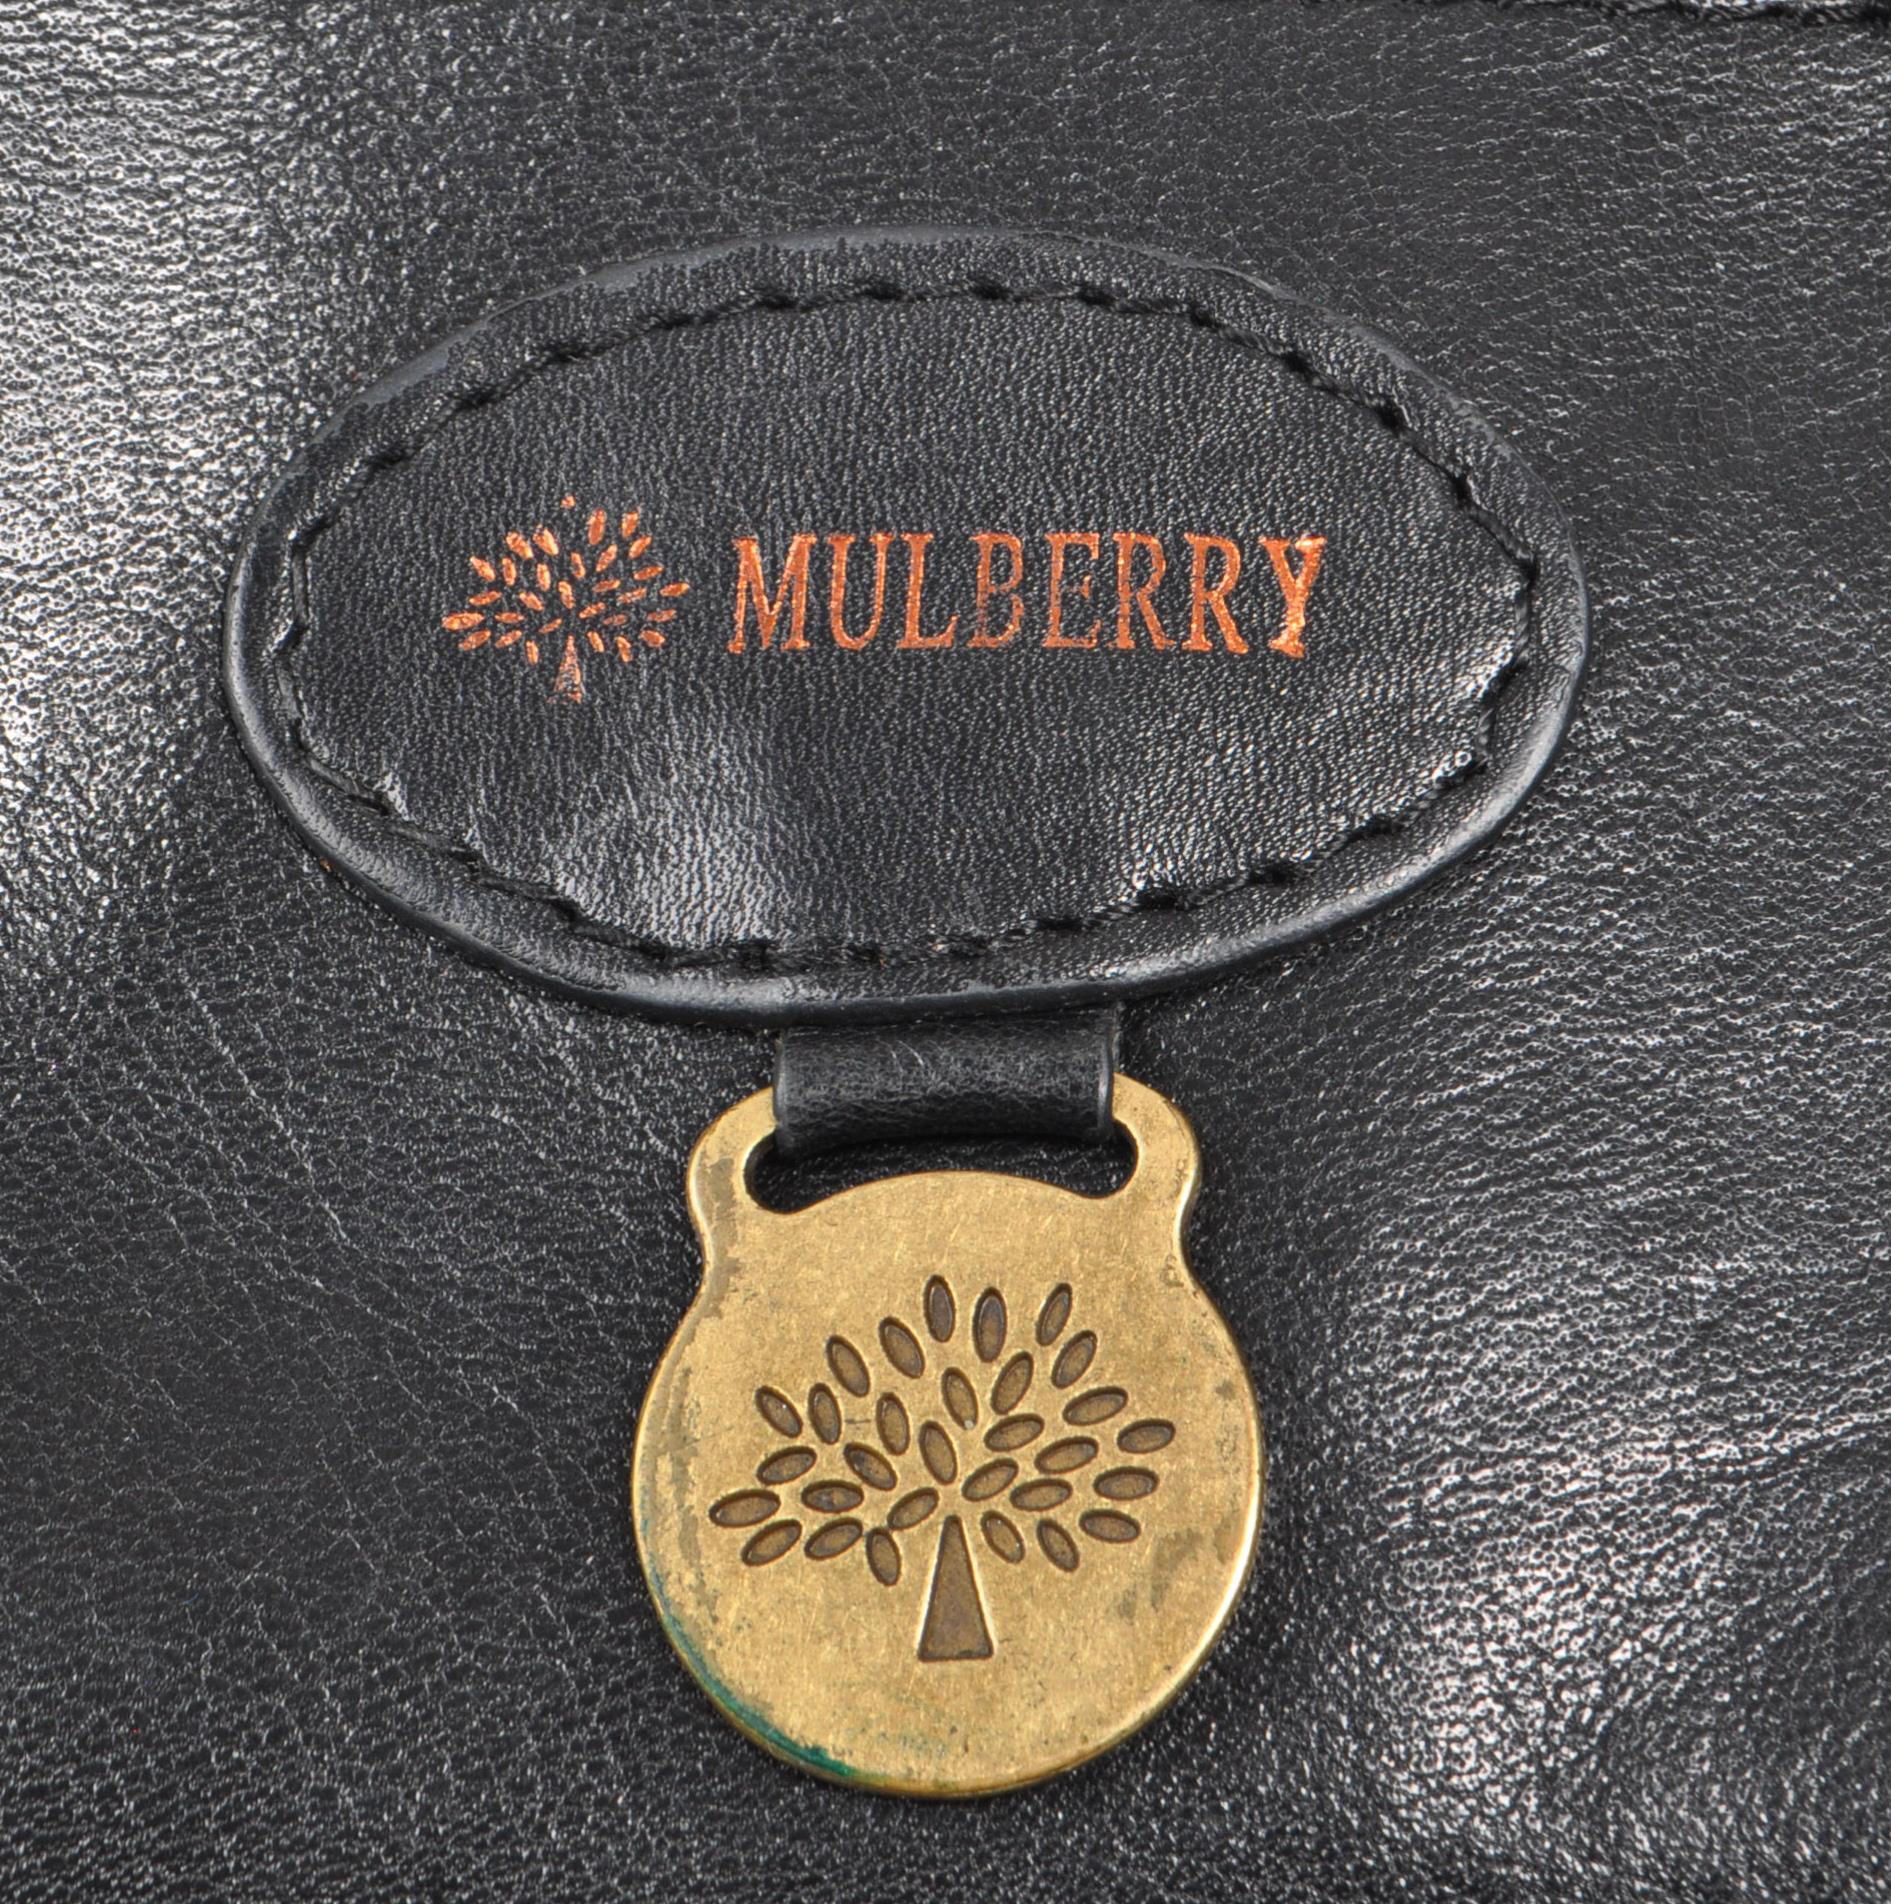 MULBERRY - CONTEMPORARY BAYSWATER LEATHER HANDBAG - Image 6 of 7